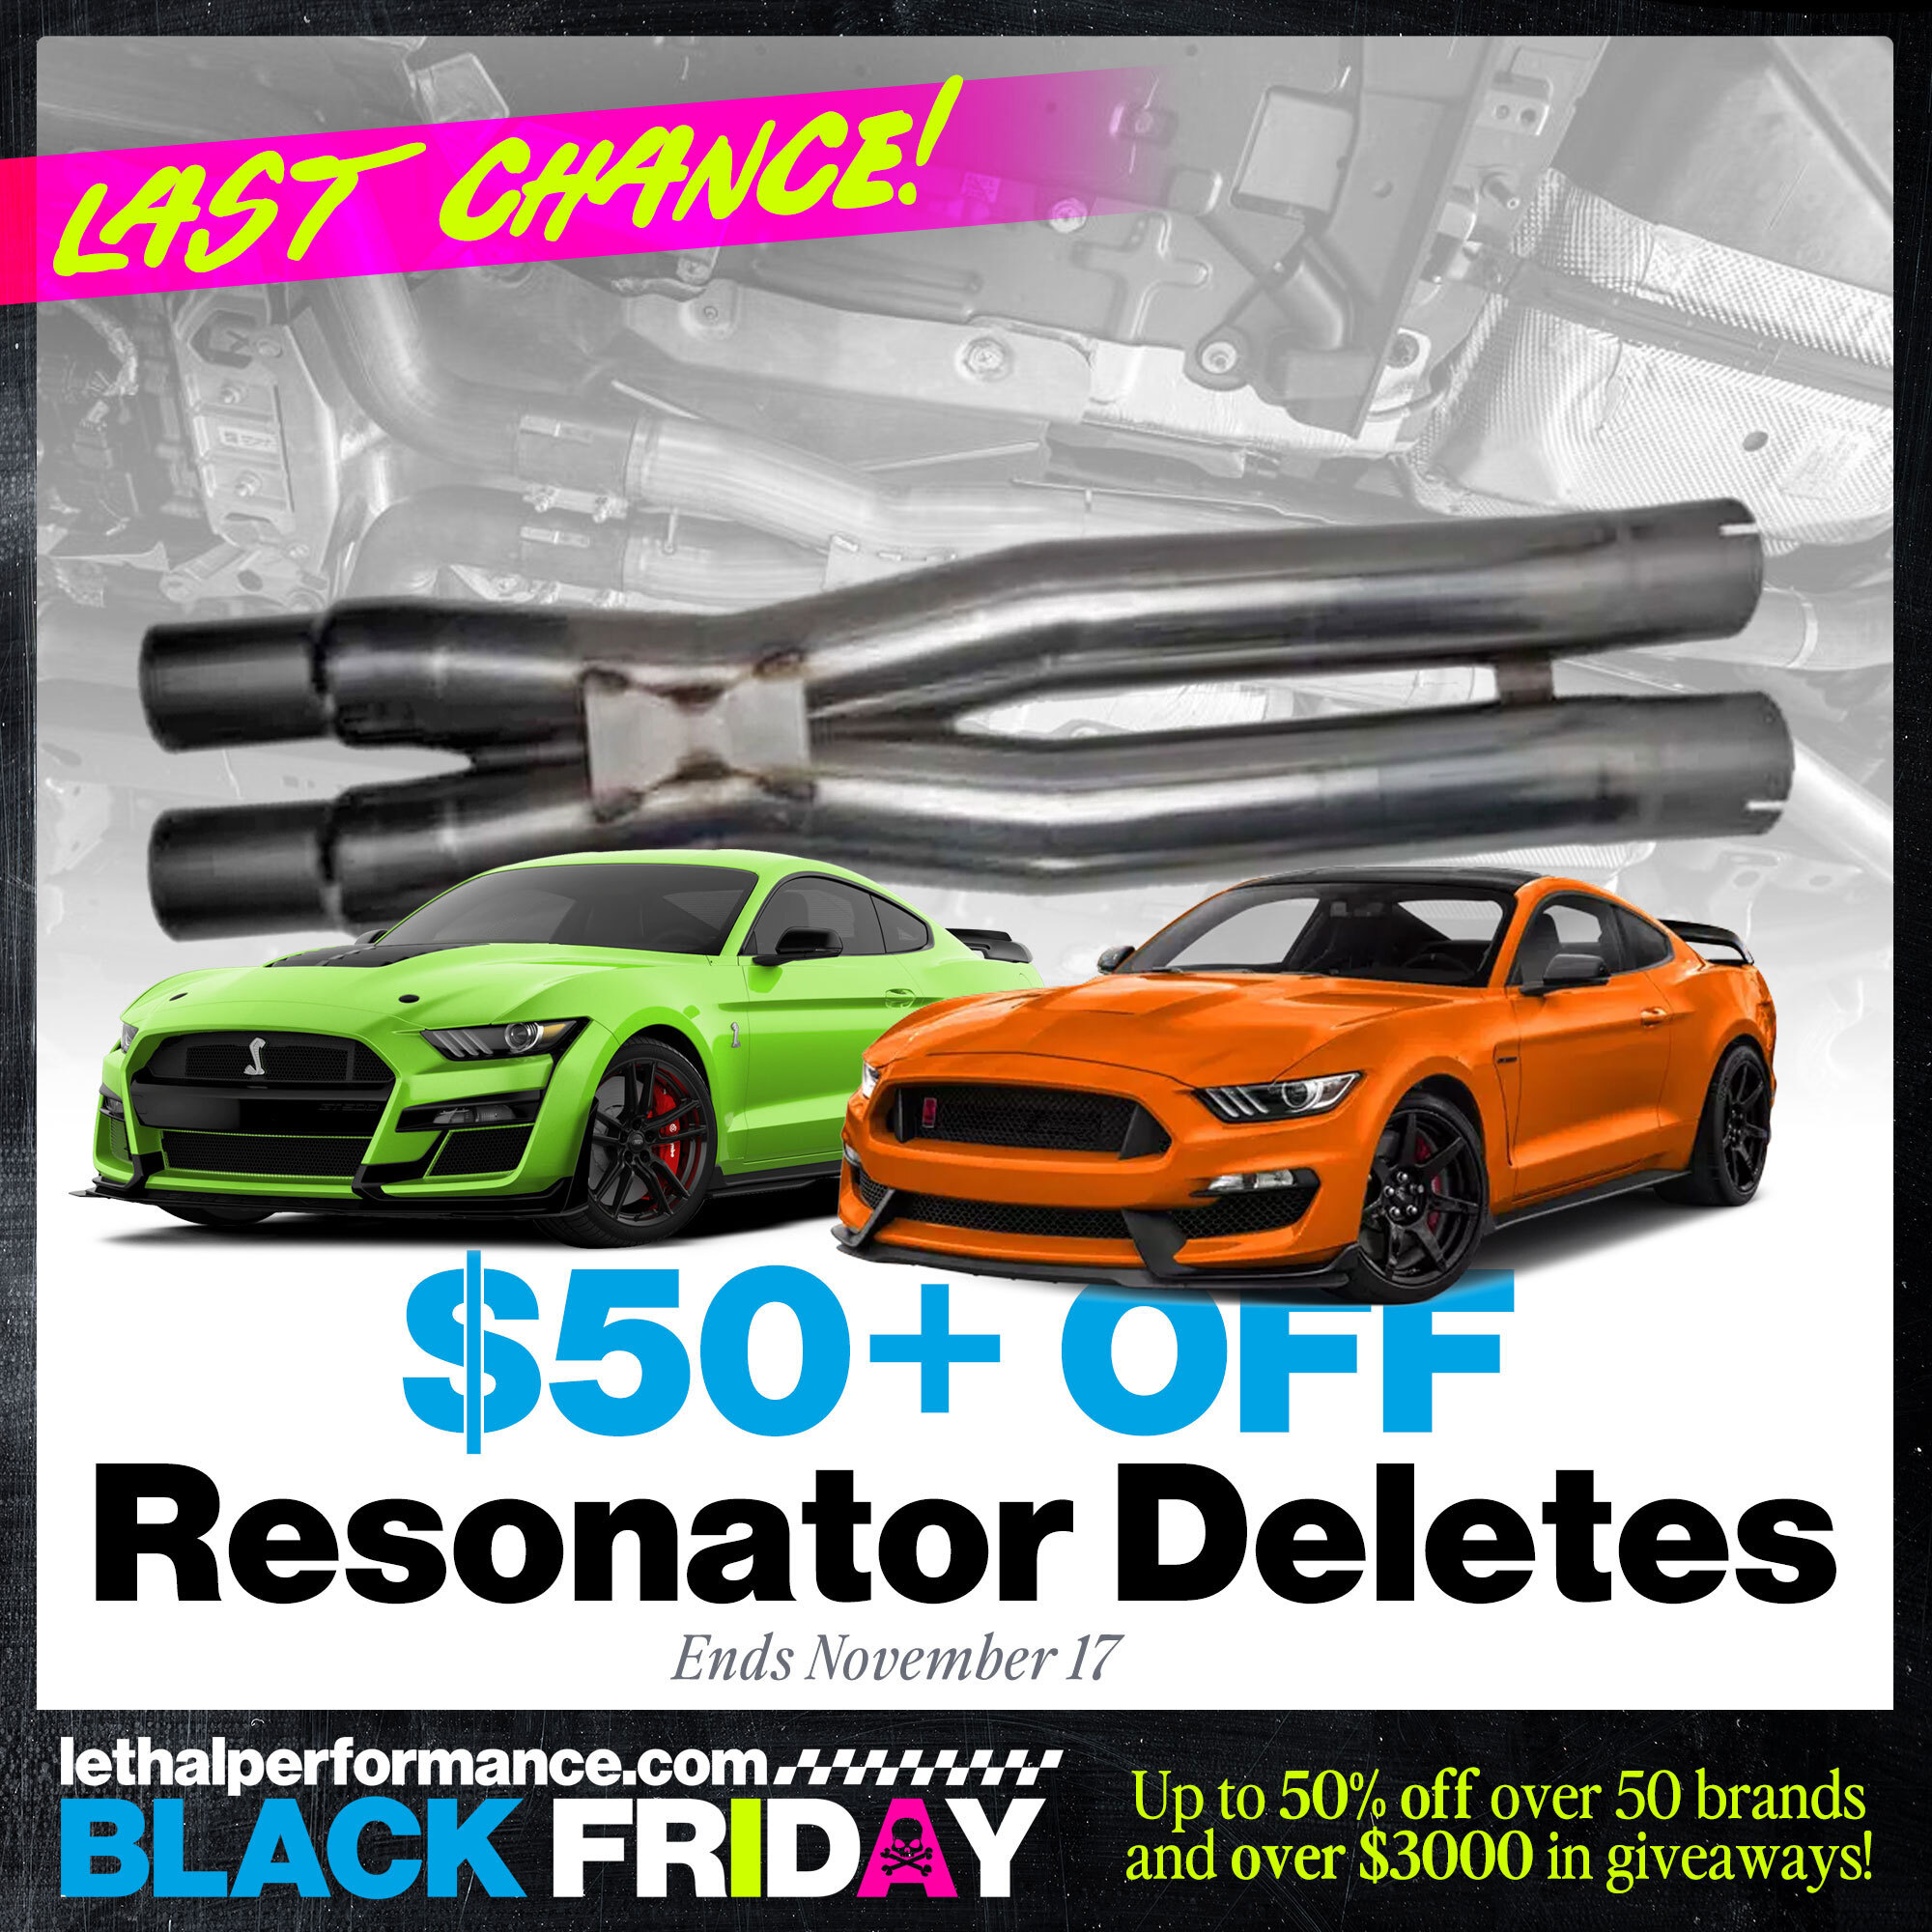 S650 Mustang Black Friday starts NOW! Up to 50% off! ResonatorDelete_LastChance